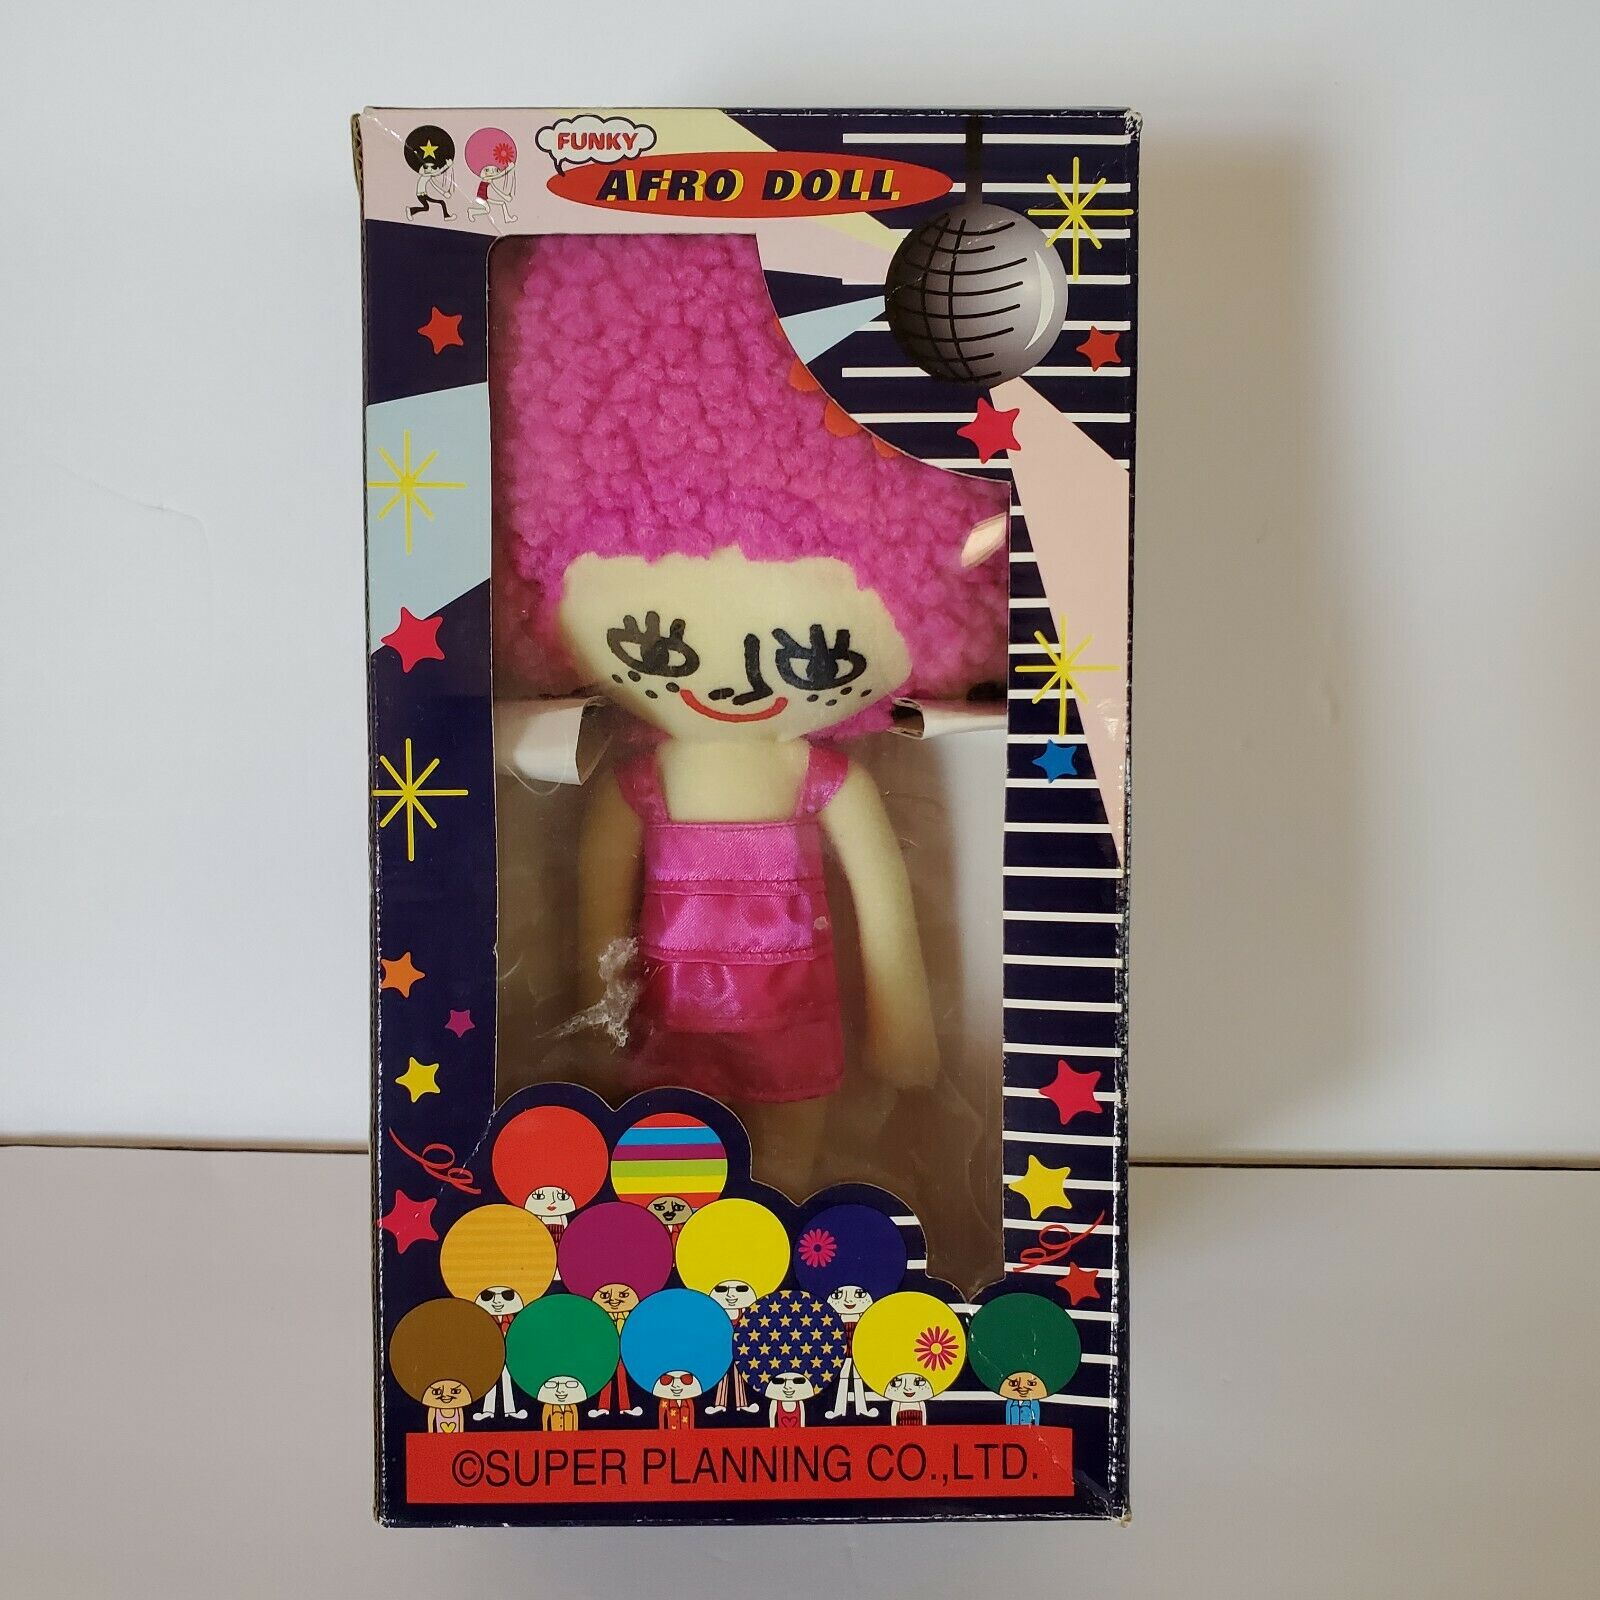 1990s Japanese Afro Doll